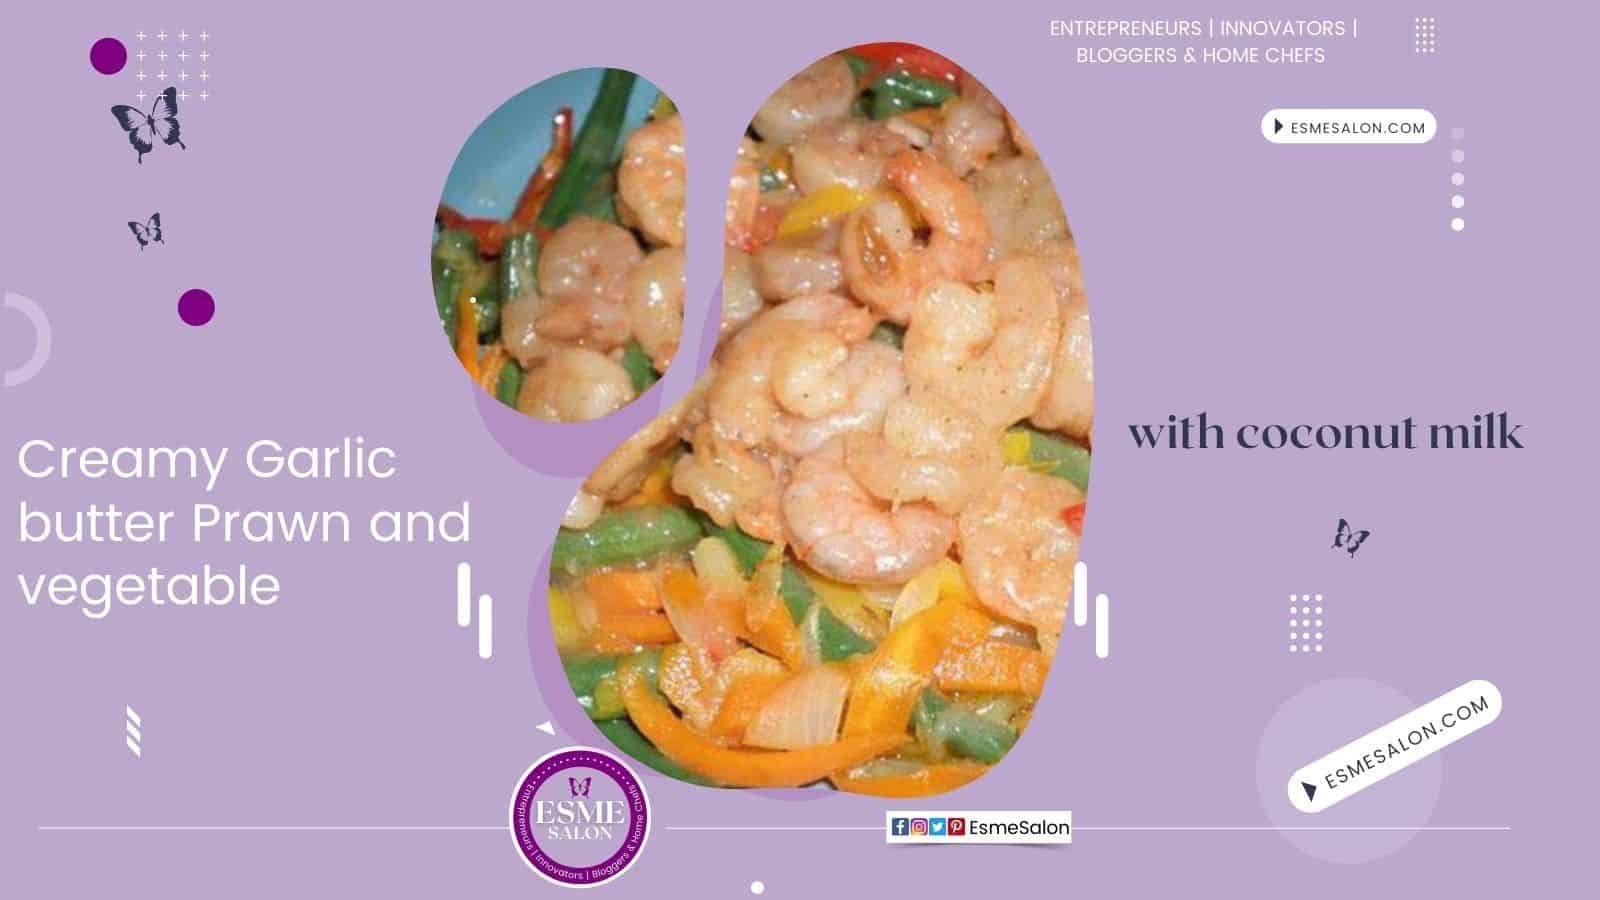 An image of a light blue plate with Creamy Garlic butter Prawn and vegetables